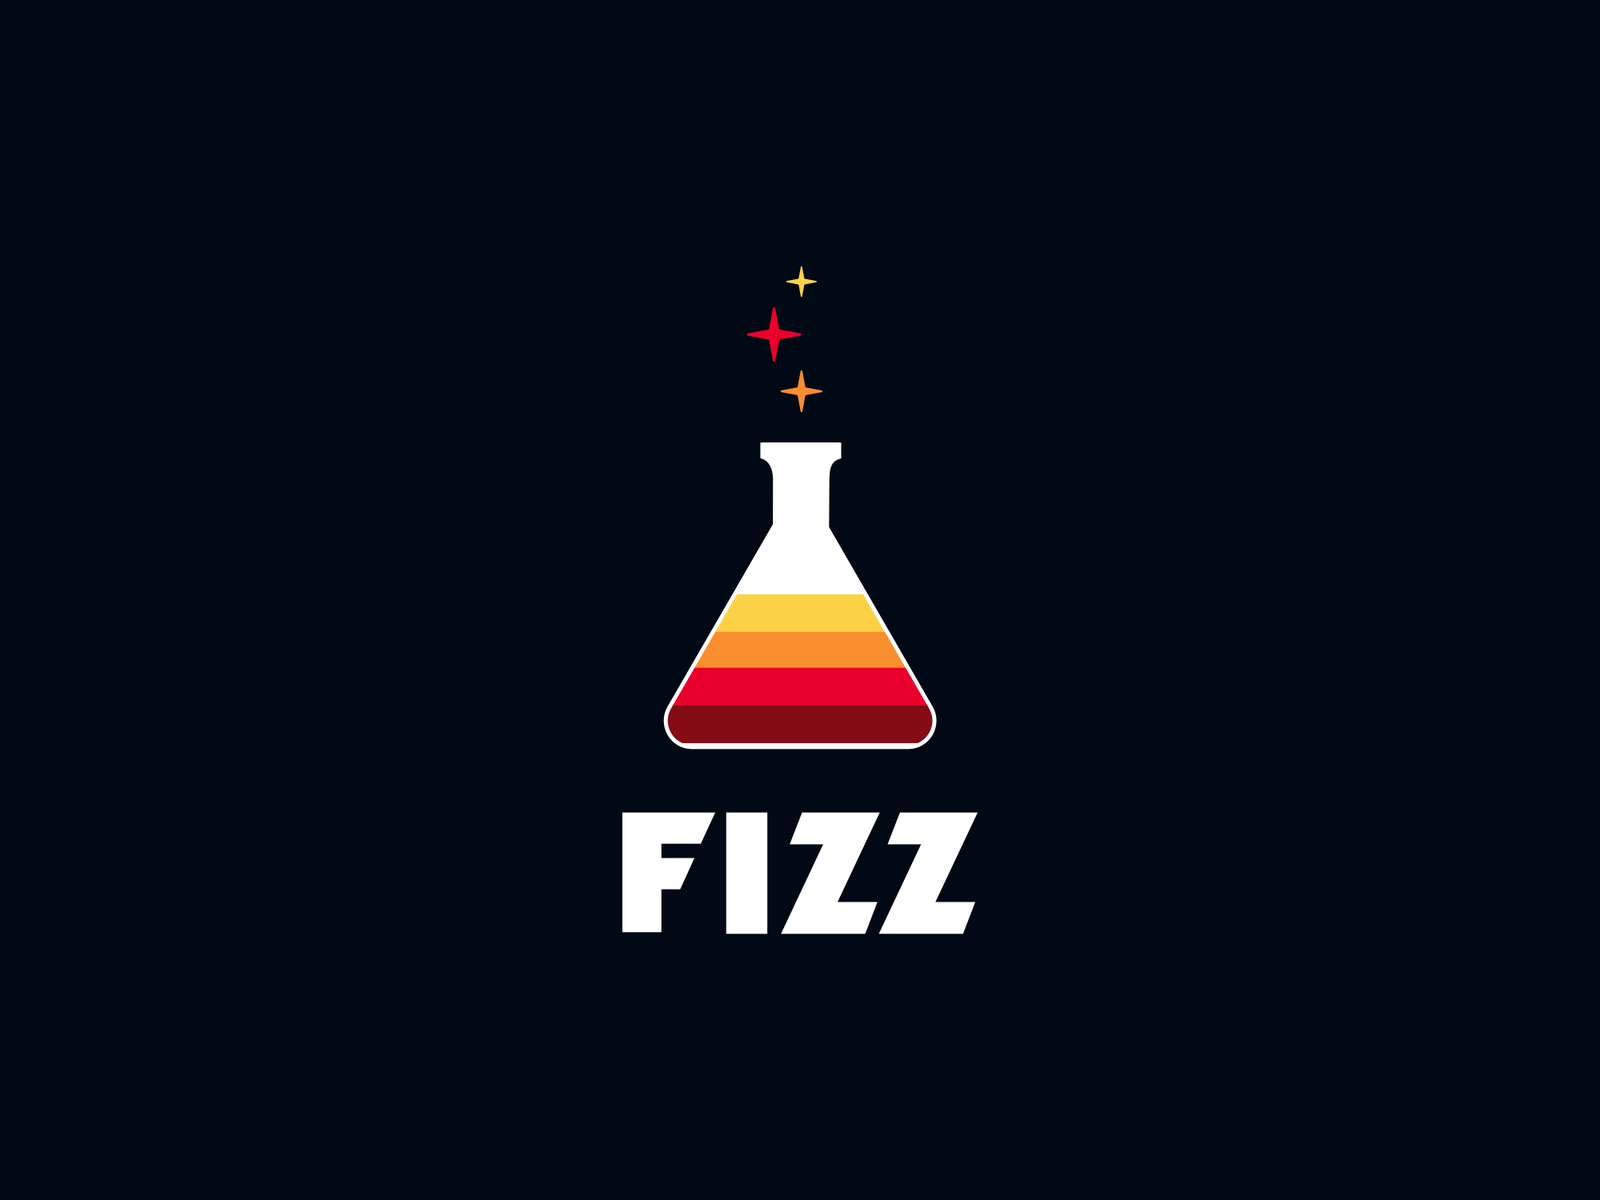 Fiz logo letter vector for brand • wall stickers letter, trend, vector |  myloview.com